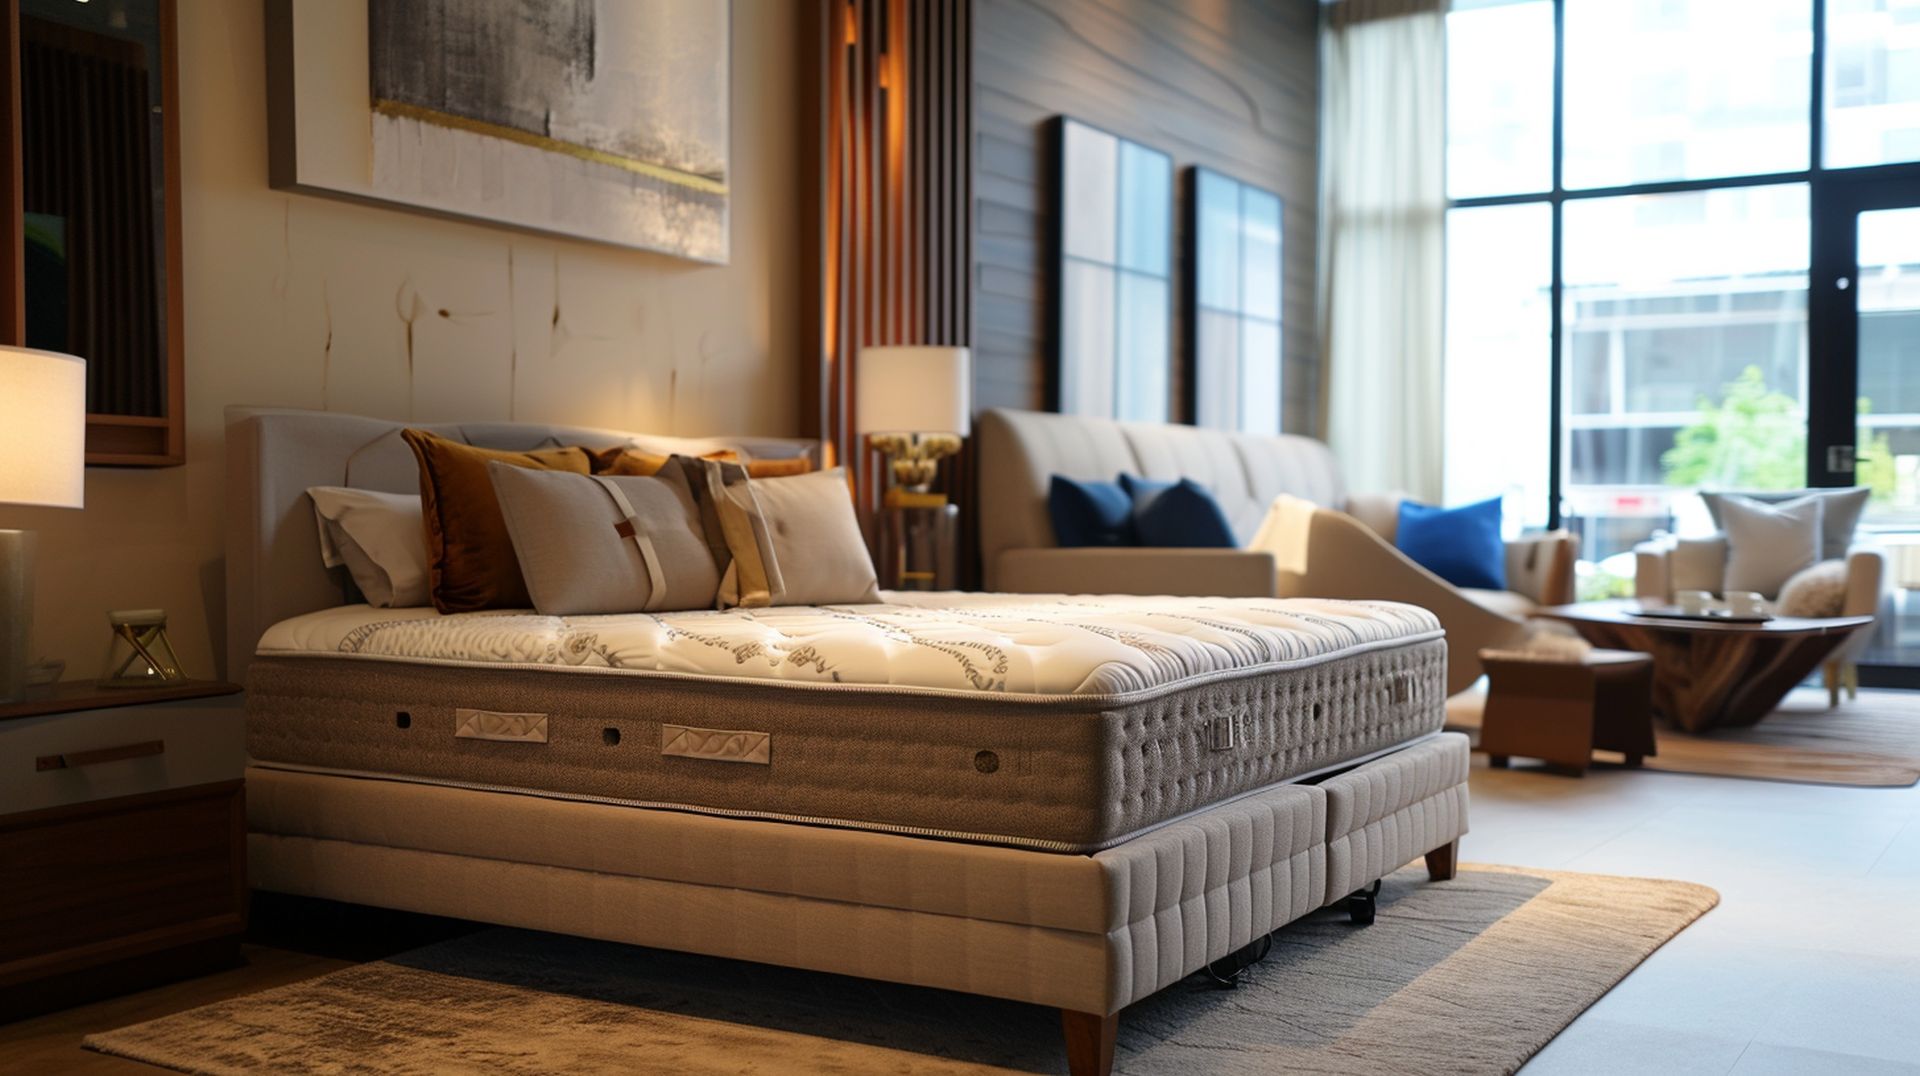 Types of mattresses at mattress dealers in South Weymouth, MA